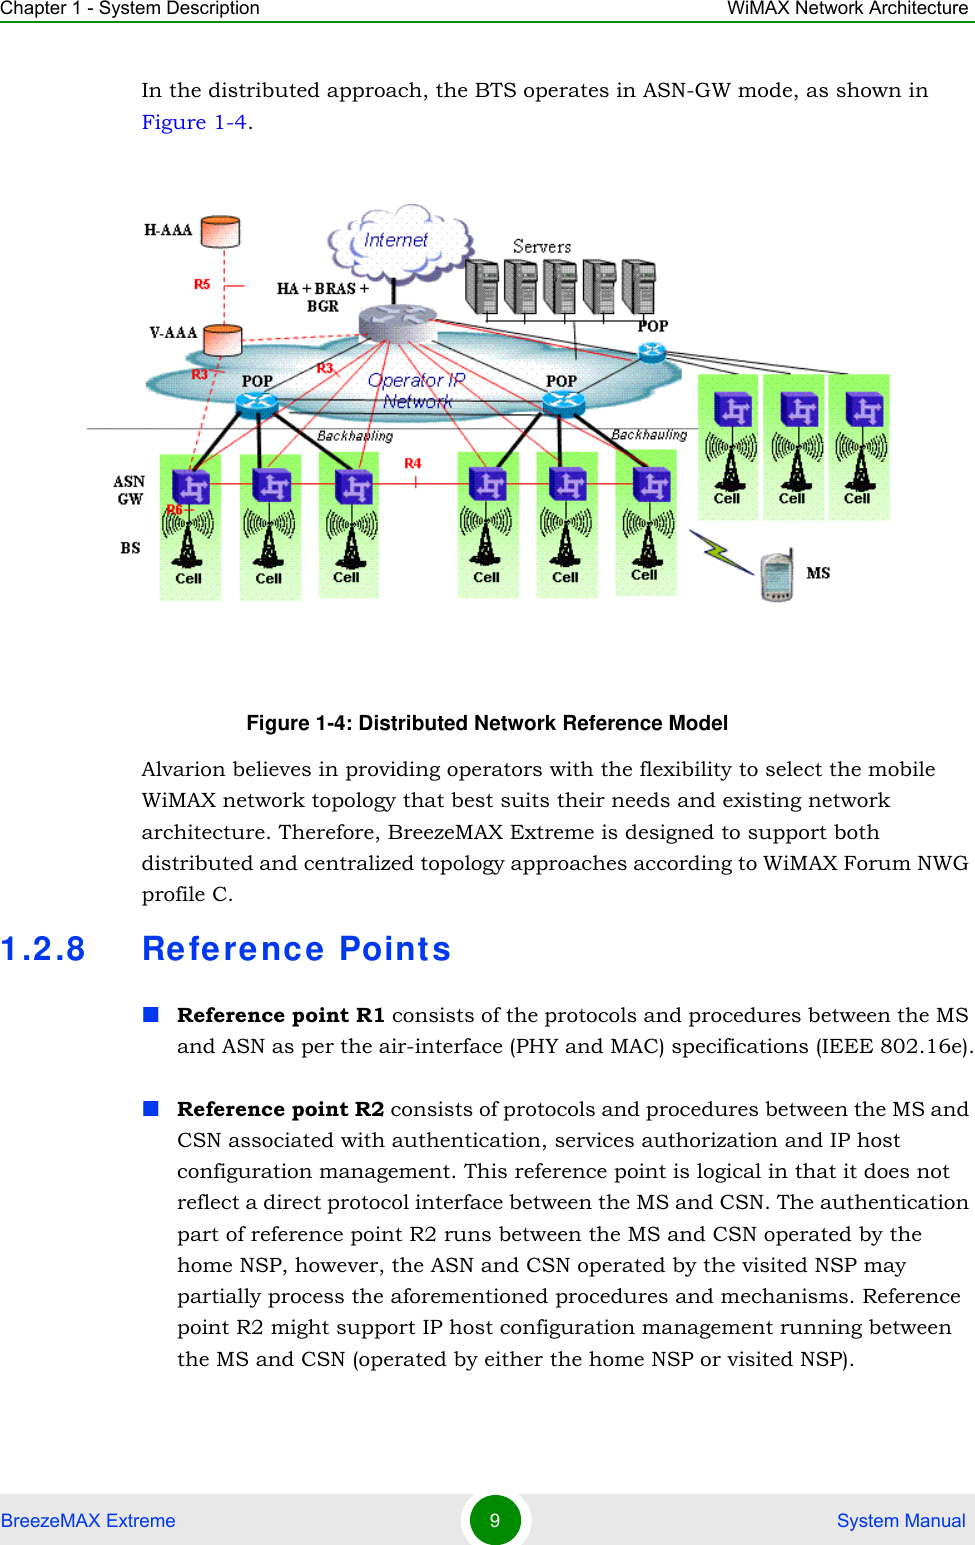 Chapter 1 - System Description WiMAX Network ArchitectureBreezeMAX Extreme 9 System ManualIn the distributed approach, the BTS operates in ASN-GW mode, as shown in Figure 1-4. Alvarion believes in providing operators with the flexibility to select the mobile WiMAX network topology that best suits their needs and existing network architecture. Therefore, BreezeMAX Extreme is designed to support both distributed and centralized topology approaches according to WiMAX Forum NWG profile C.1.2.8 Reference PointsReference point R1 consists of the protocols and procedures between the MS and ASN as per the air-interface (PHY and MAC) specifications (IEEE 802.16e).Reference point R2 consists of protocols and procedures between the MS and CSN associated with authentication, services authorization and IP host configuration management. This reference point is logical in that it does not reflect a direct protocol interface between the MS and CSN. The authentication part of reference point R2 runs between the MS and CSN operated by the home NSP, however, the ASN and CSN operated by the visited NSP may partially process the aforementioned procedures and mechanisms. Reference point R2 might support IP host configuration management running between the MS and CSN (operated by either the home NSP or visited NSP).Figure 1-4: Distributed Network Reference Model